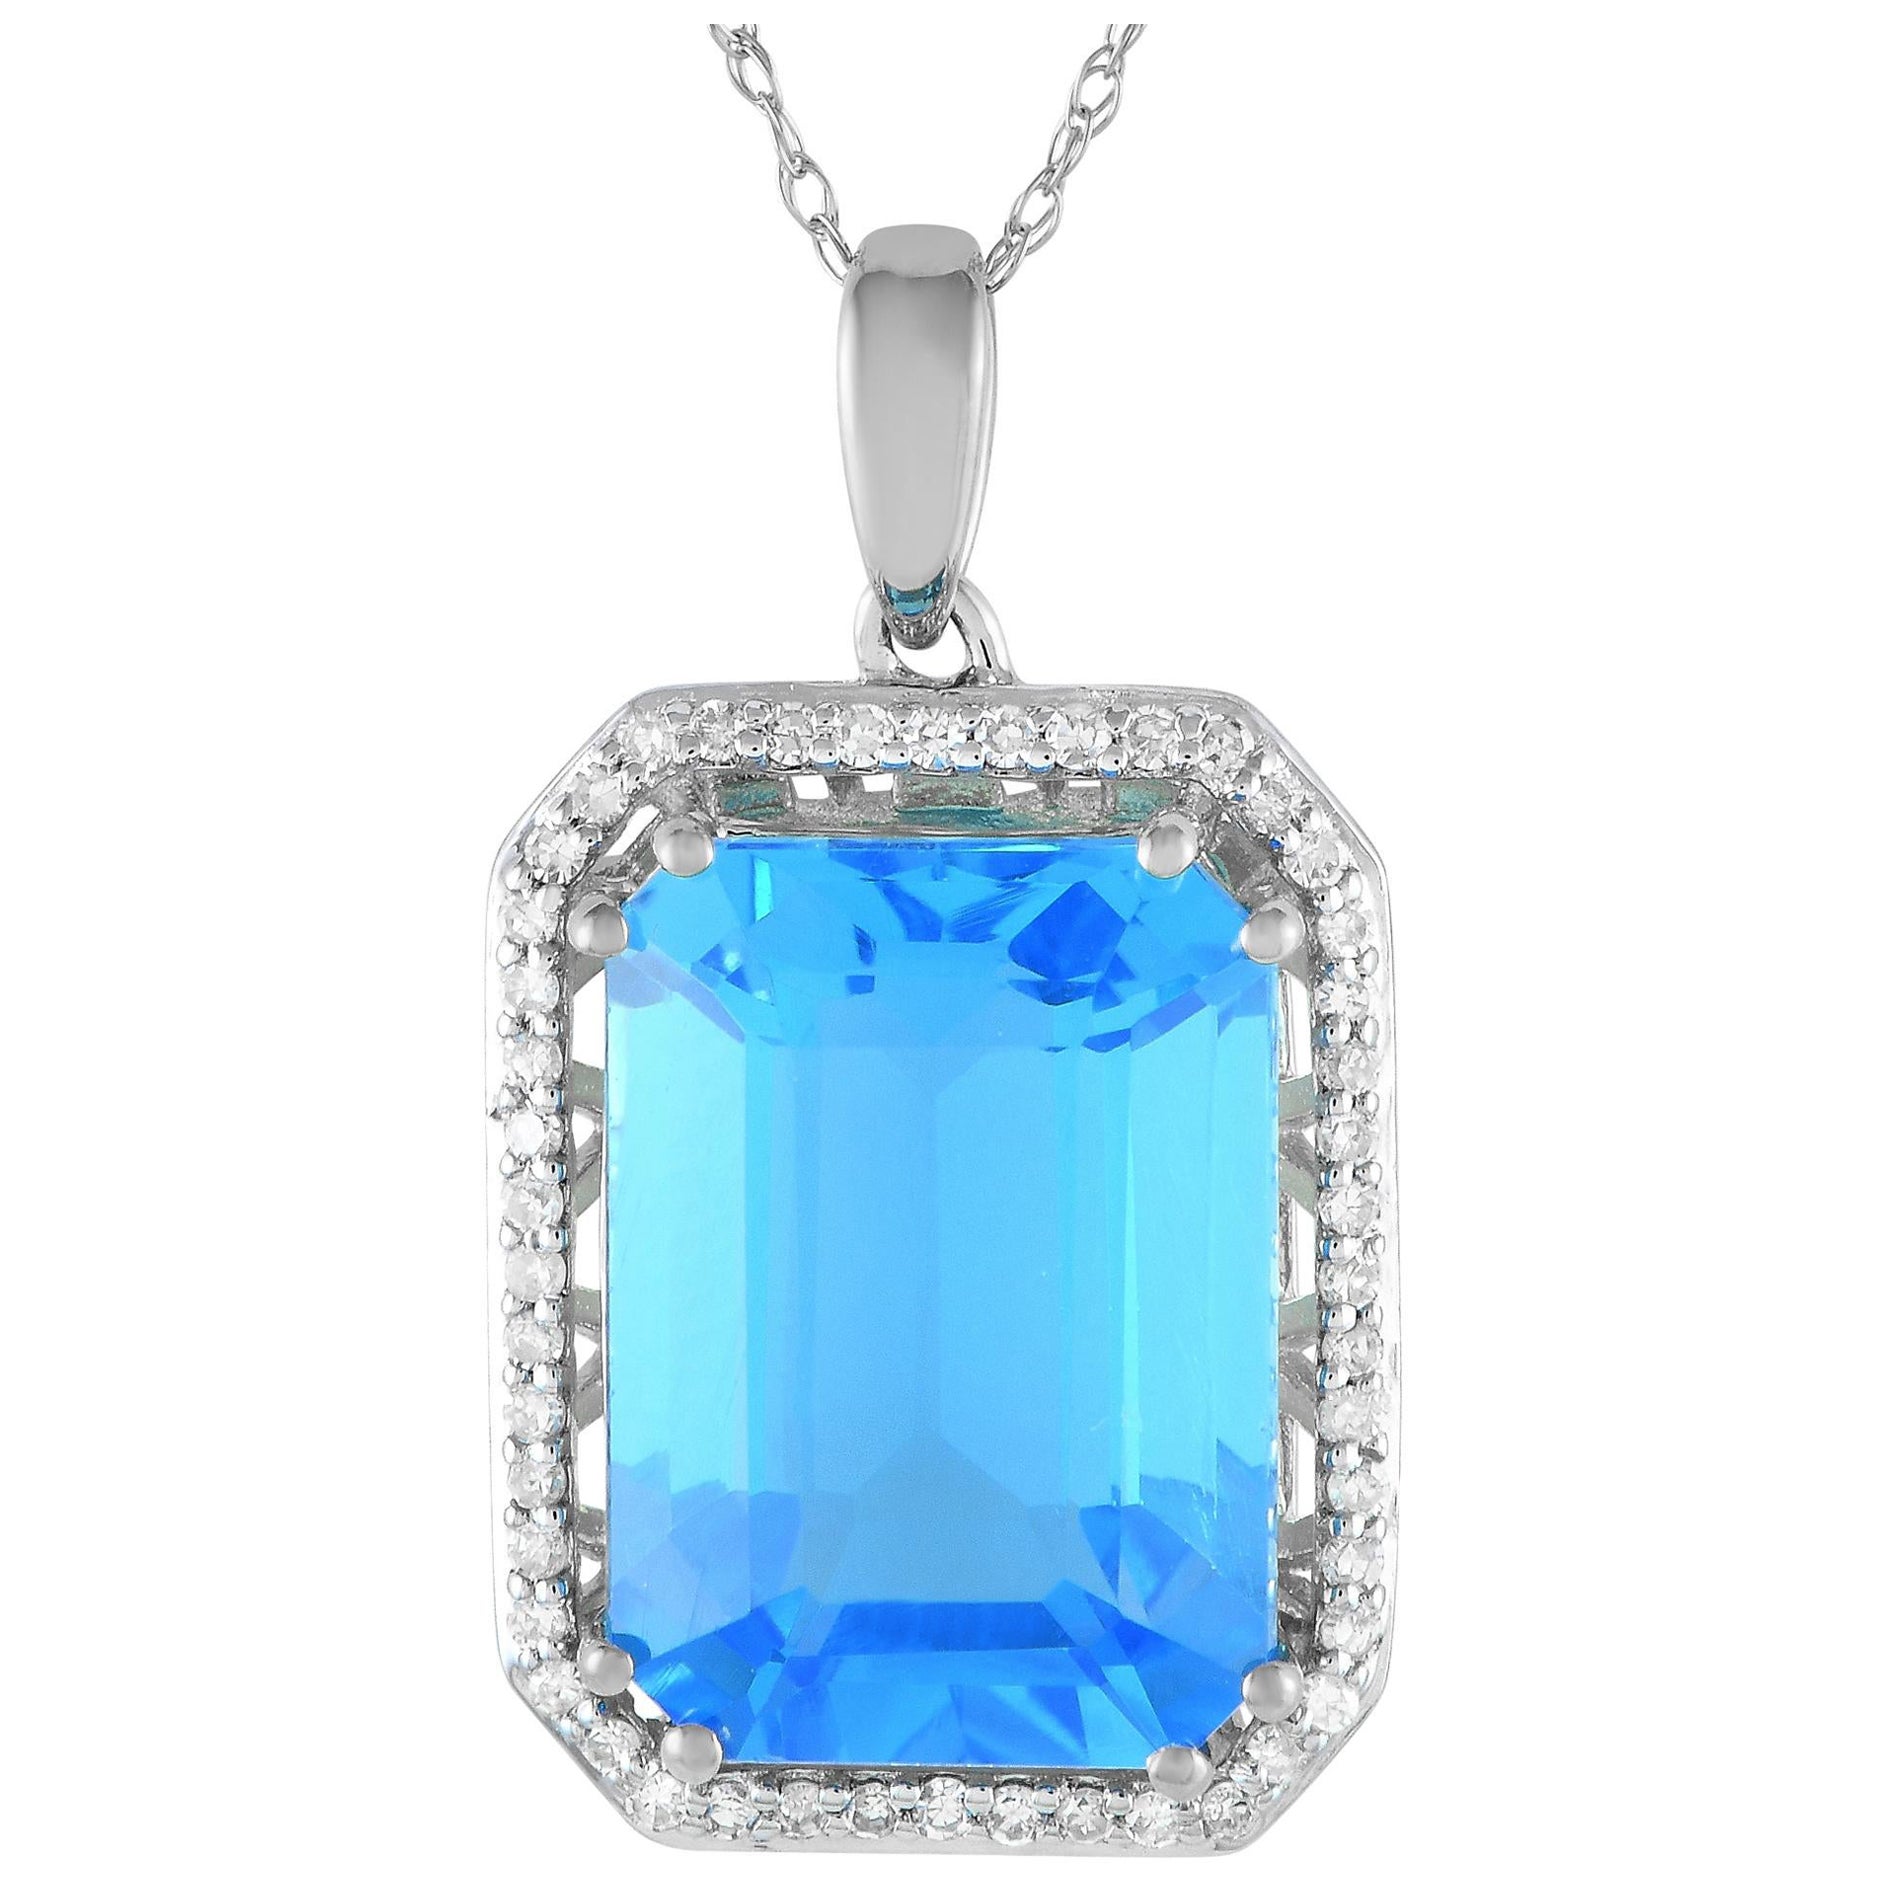 LB Exclusive 14K White Gold 0.20ct Diamond and Blue Topaz Necklace PD4-15513WBT For Sale